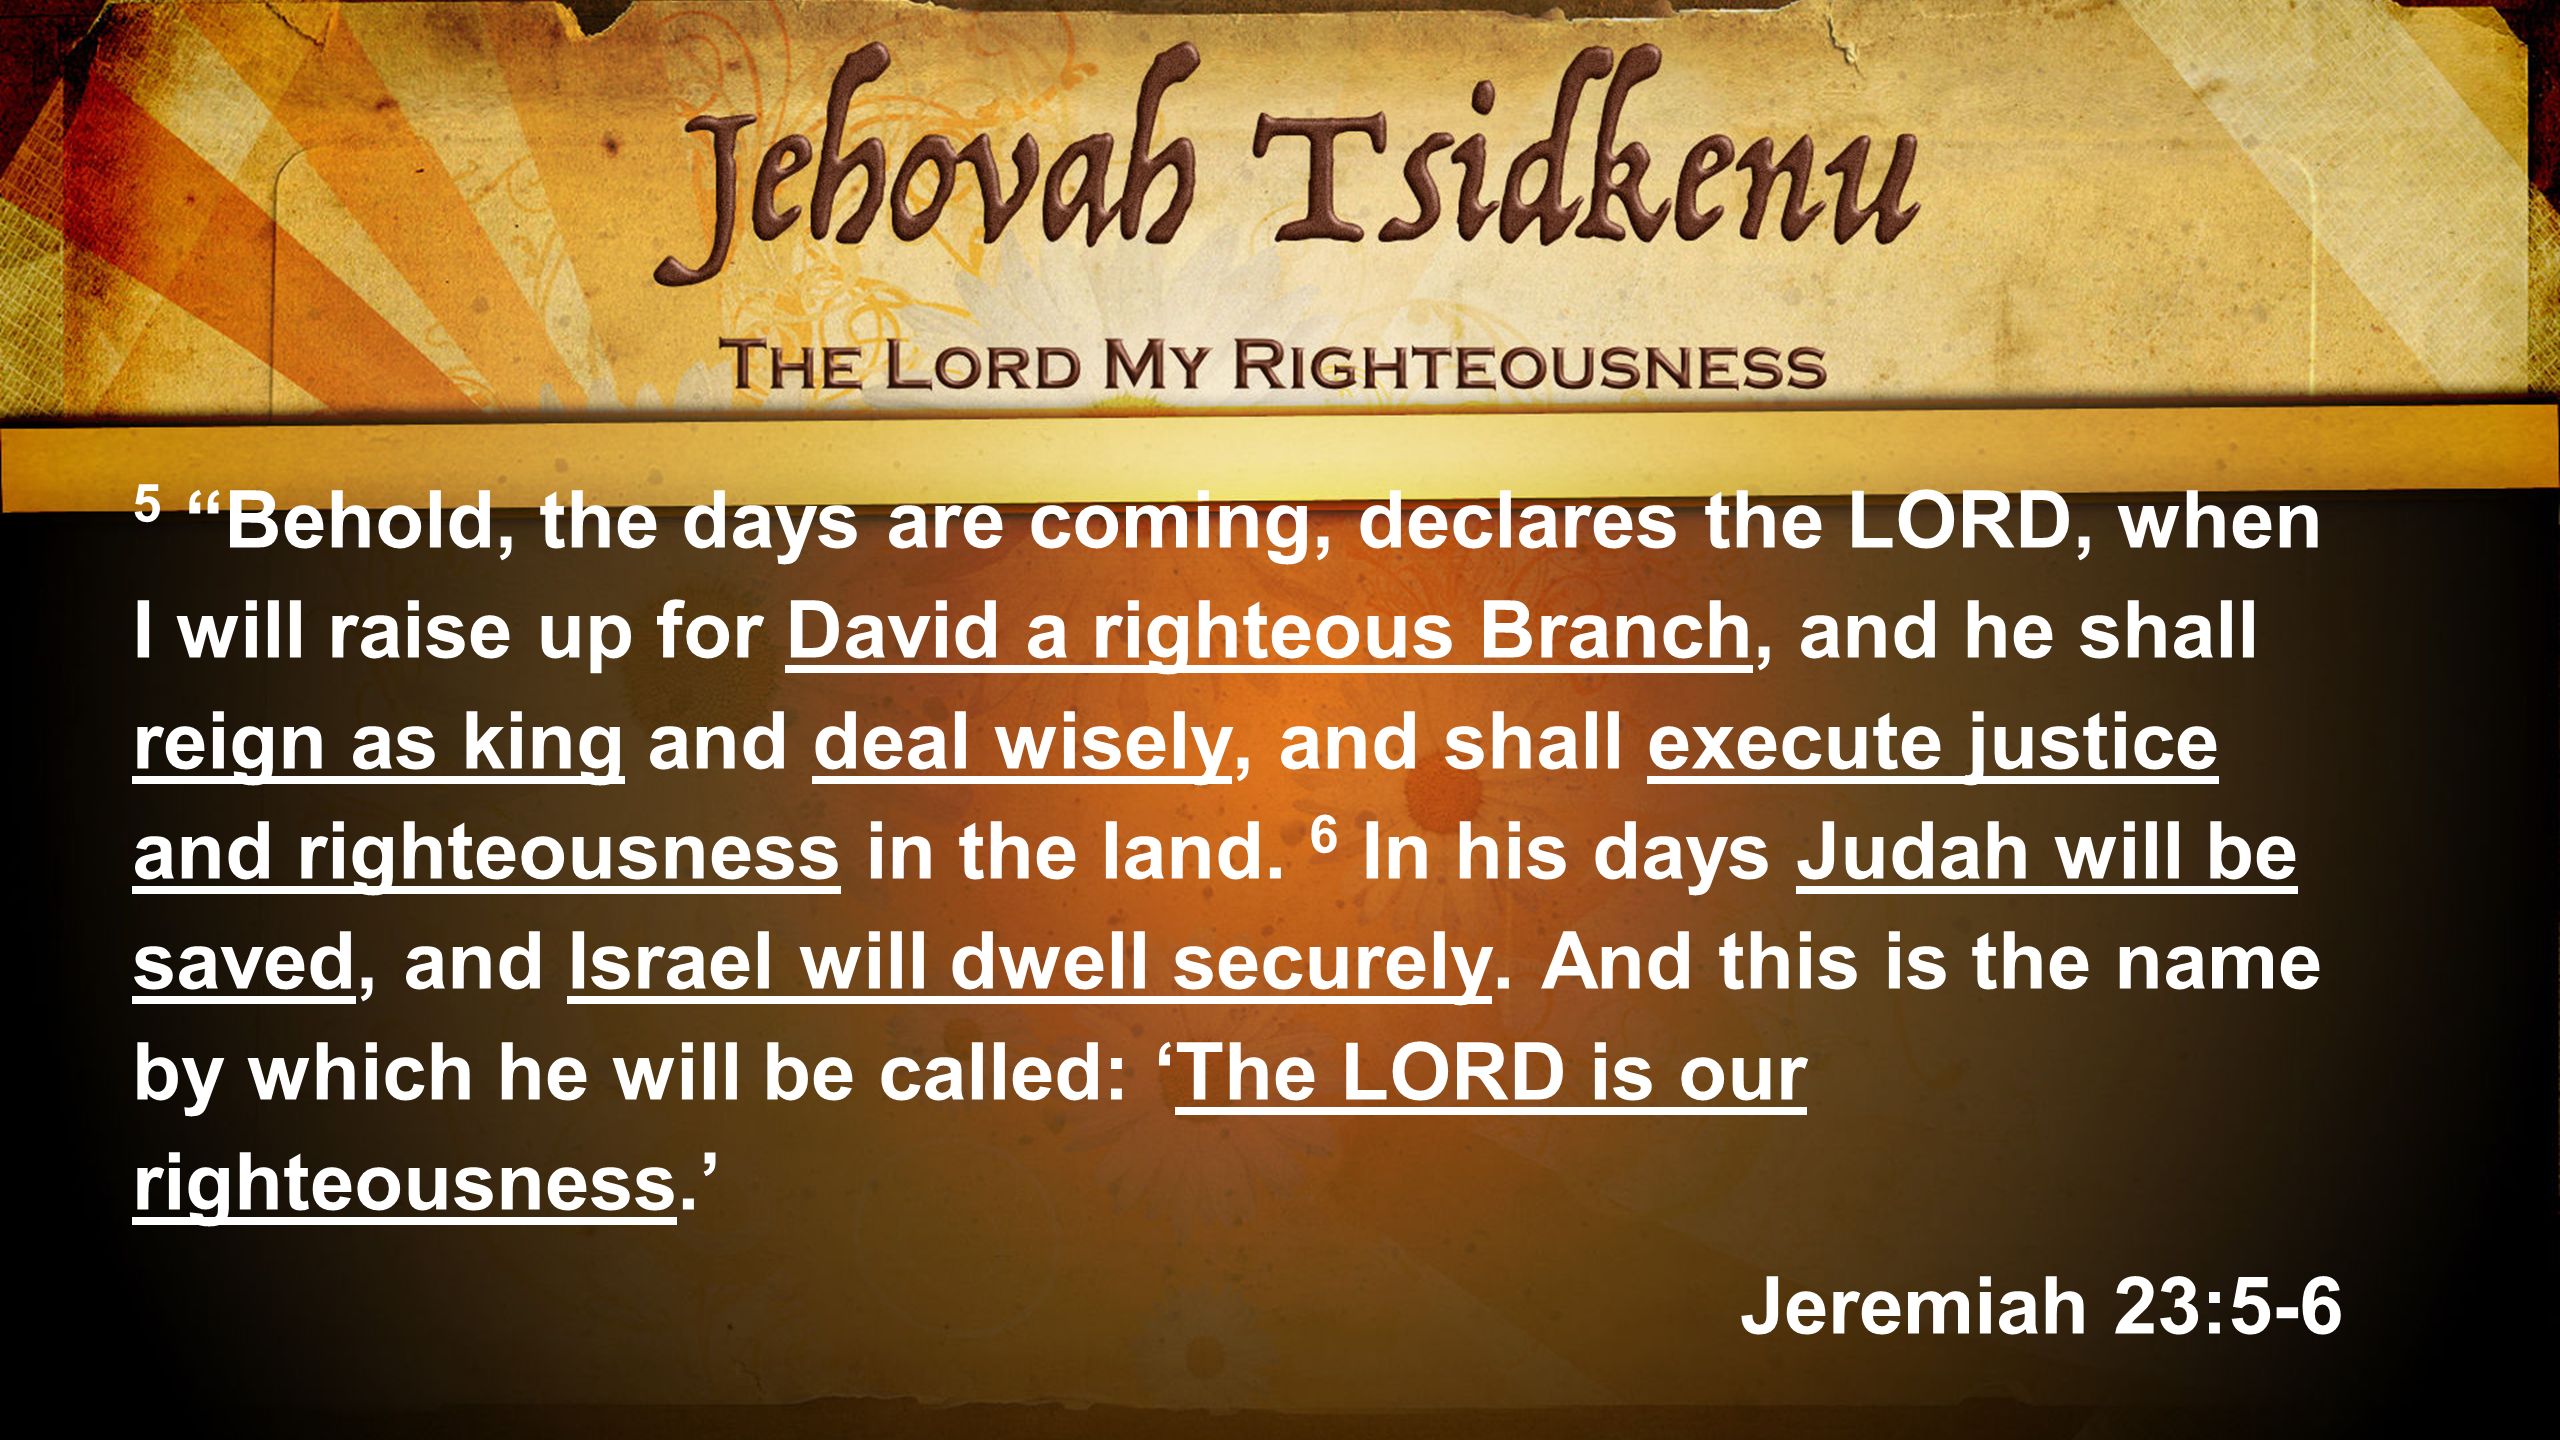 5 Behold, the days are coming, declares the LORD, when I will raise up for David a righteous Branch, and he shall reign as king and deal wisely, and shall execute justice and righteousness in the land.